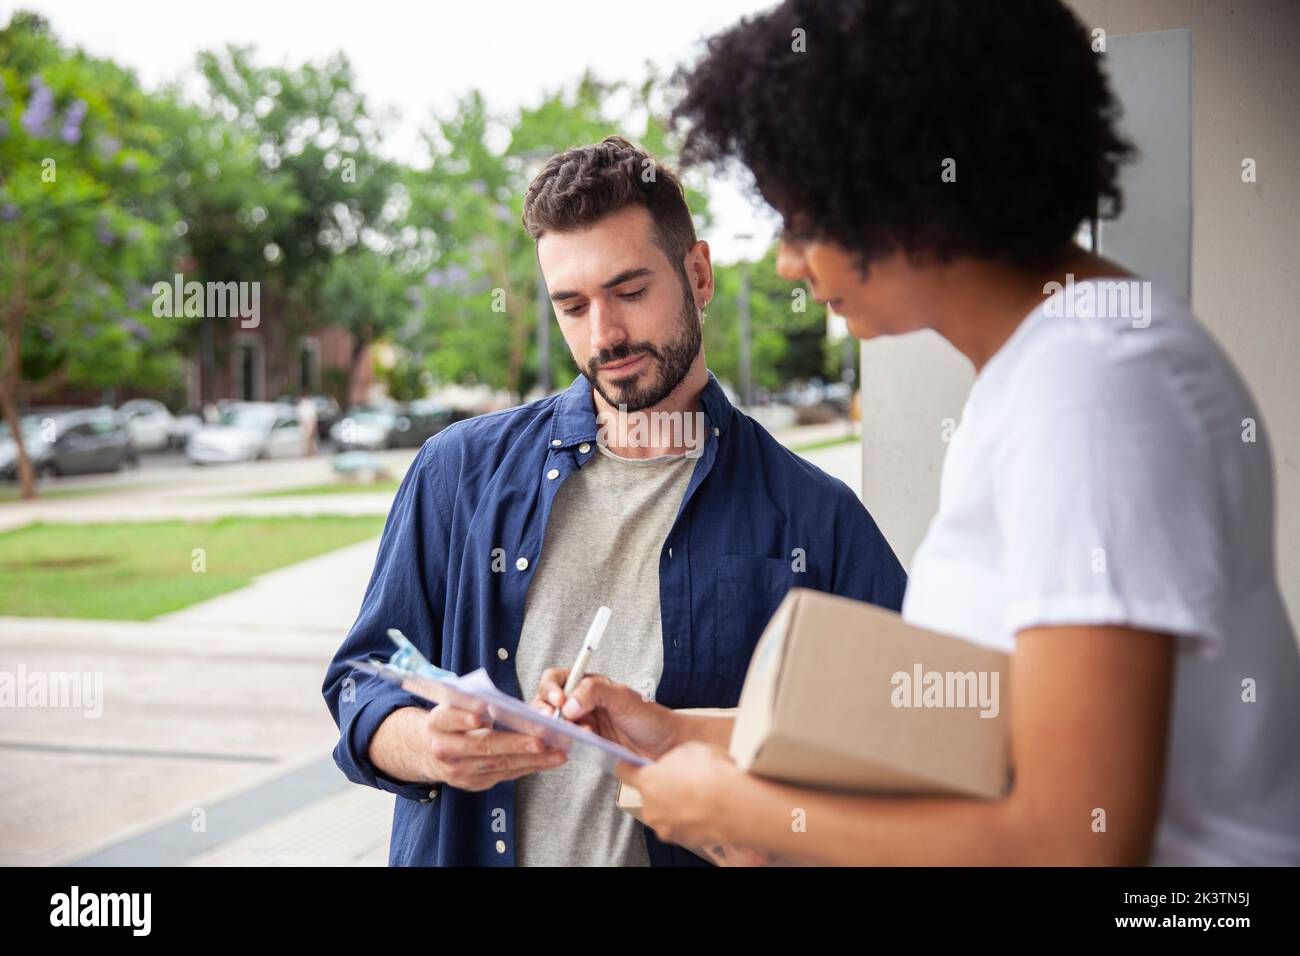 Delivery man holding clipboard while customer is signing it Stock Photo